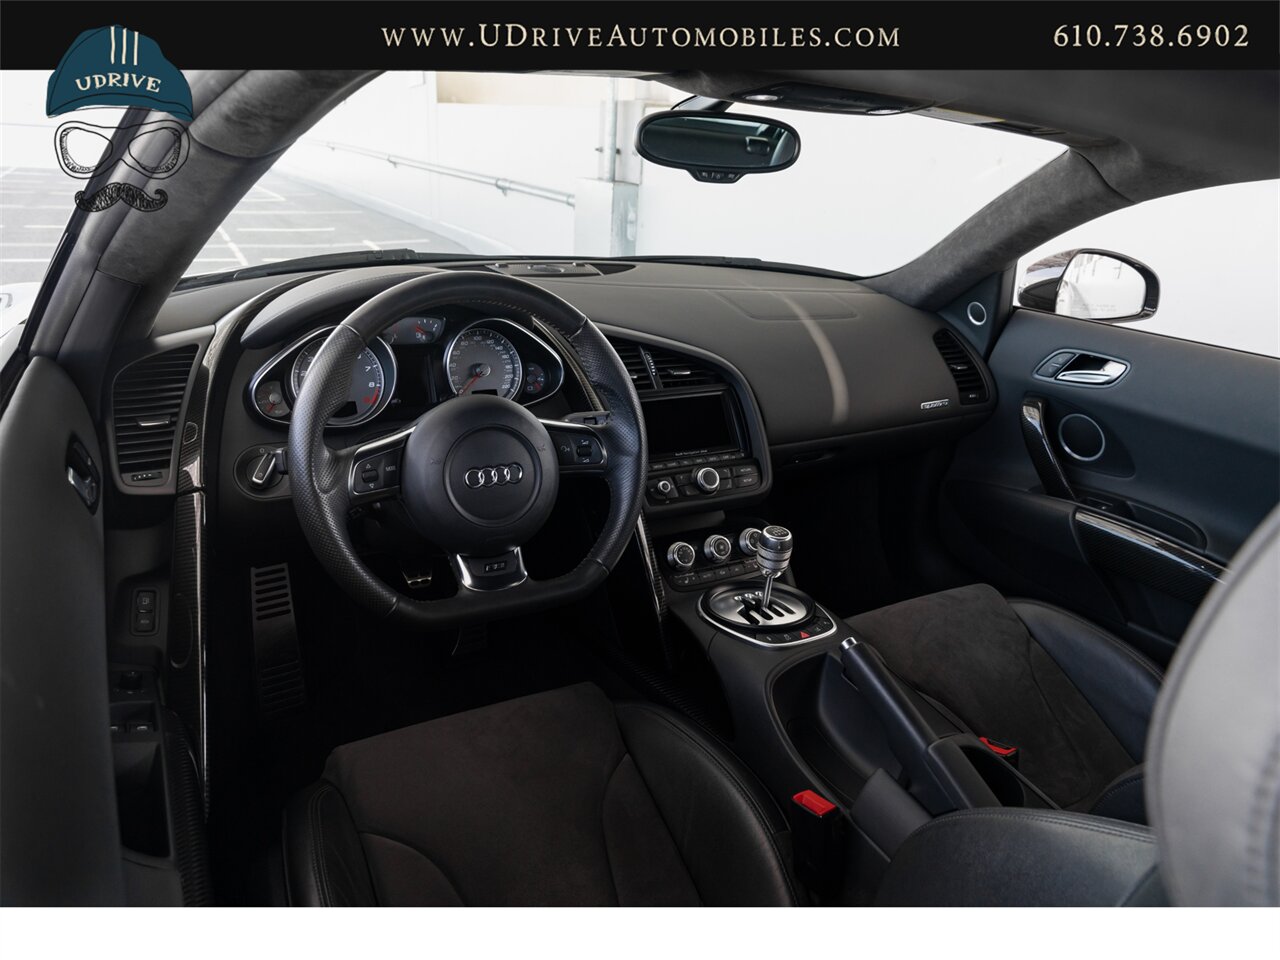 2012 Audi R8 4.2 Quattro  6 Speed Manual 1 Owner Service History - Photo 32 - West Chester, PA 19382